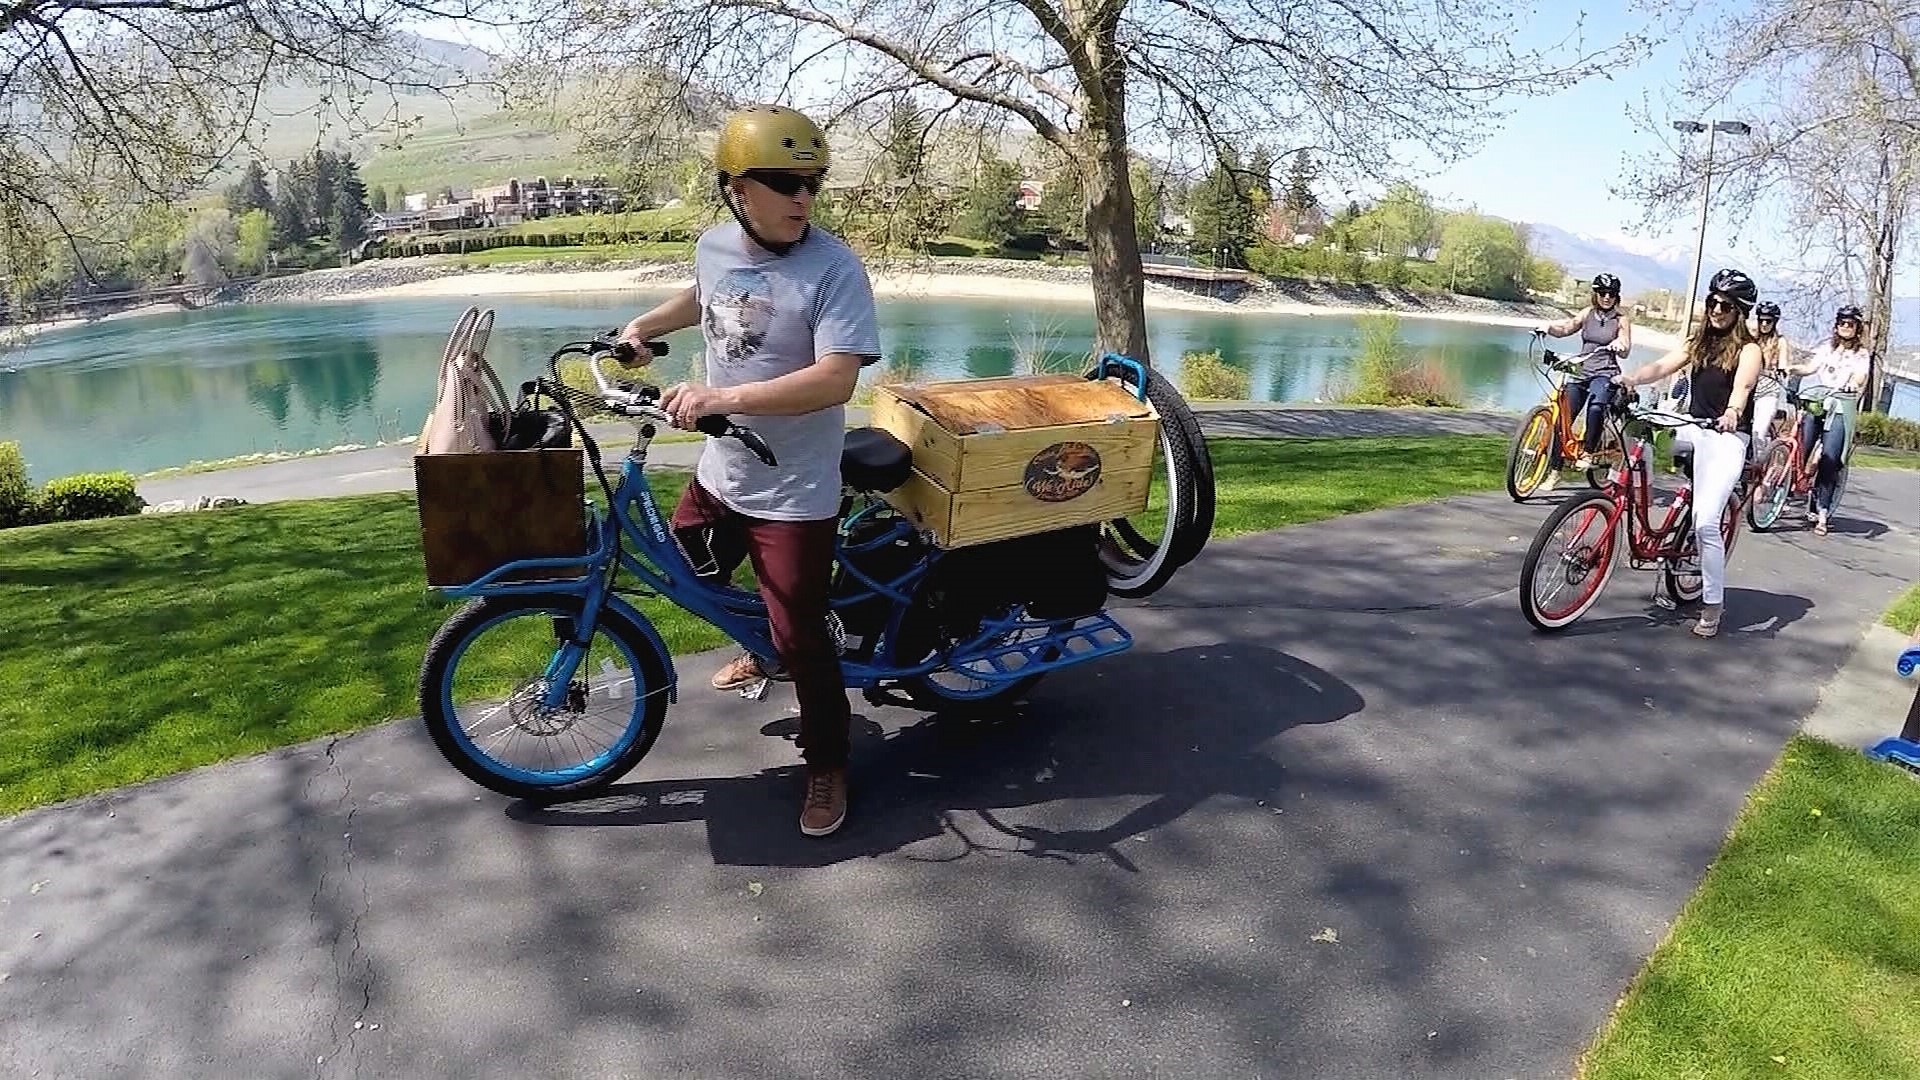 Chelan Electric Bikes offers fun guided winery tours around Lake Chelan that total 20 miles round trip.